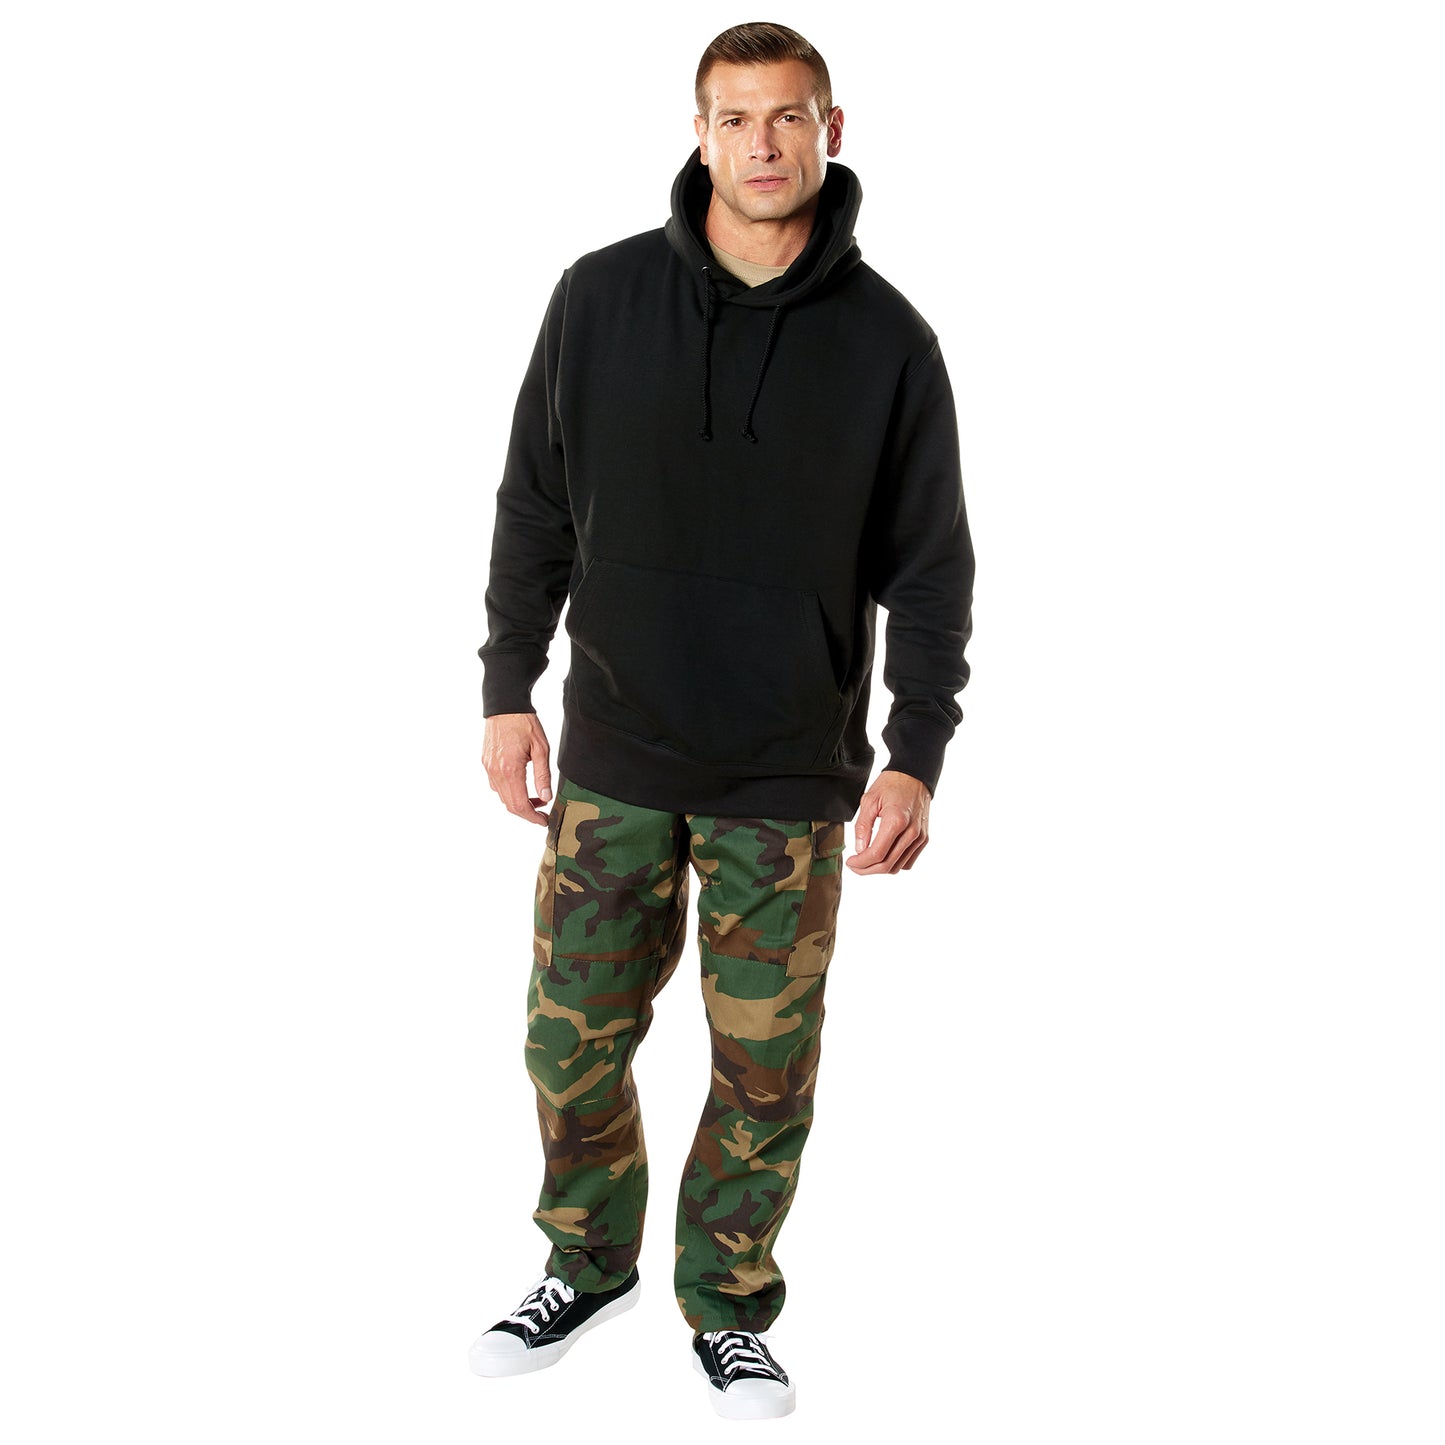 Rothco Every Day Pullover Hooded Sweatshirts